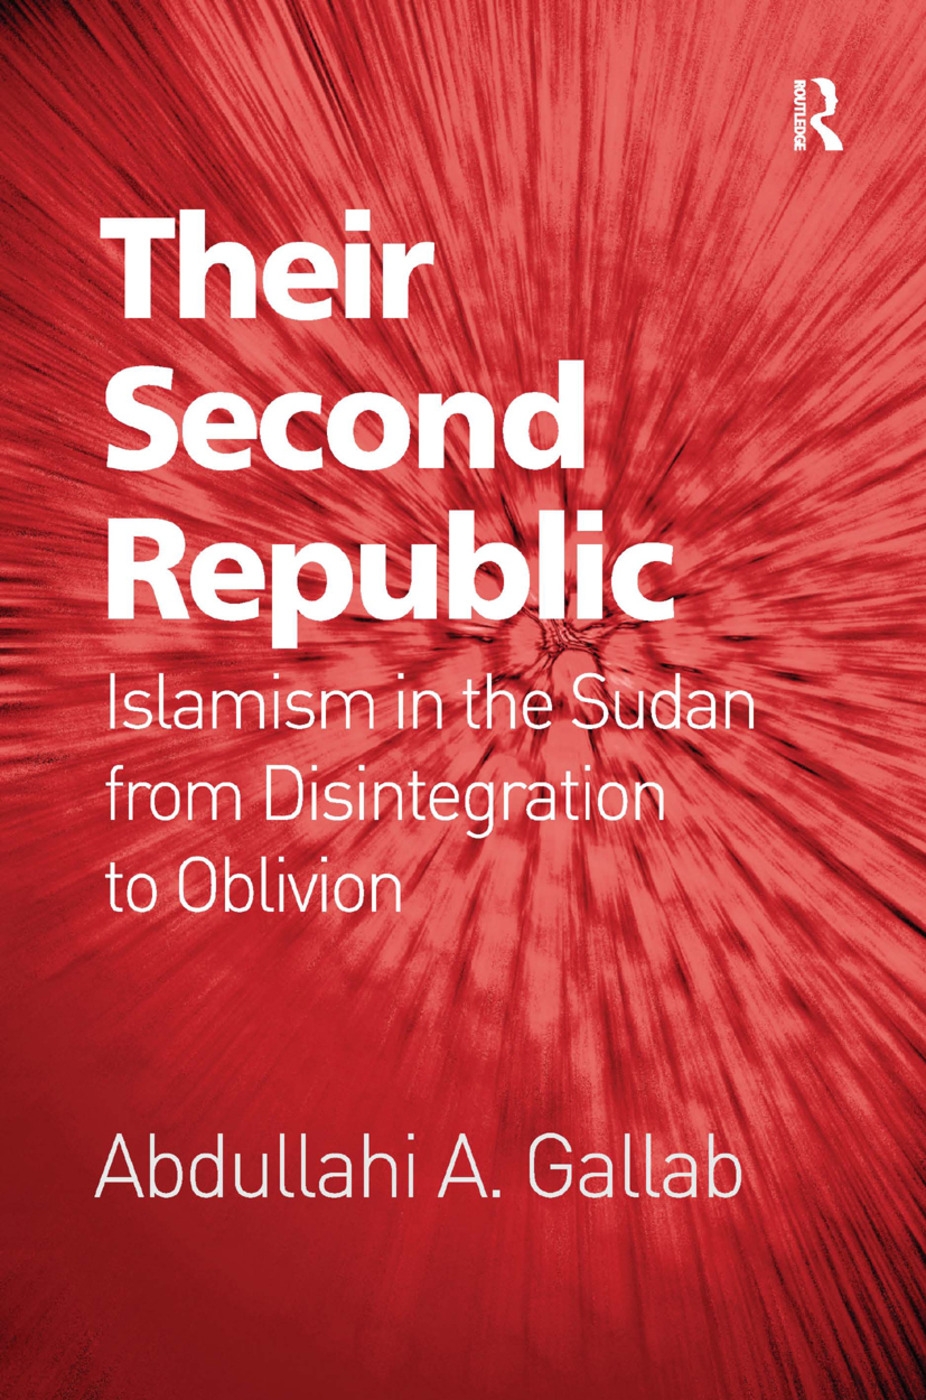 Their Second Republic: Islamism in the Sudan from Disintegration to Oblivion. Abdullahi A. Gallab